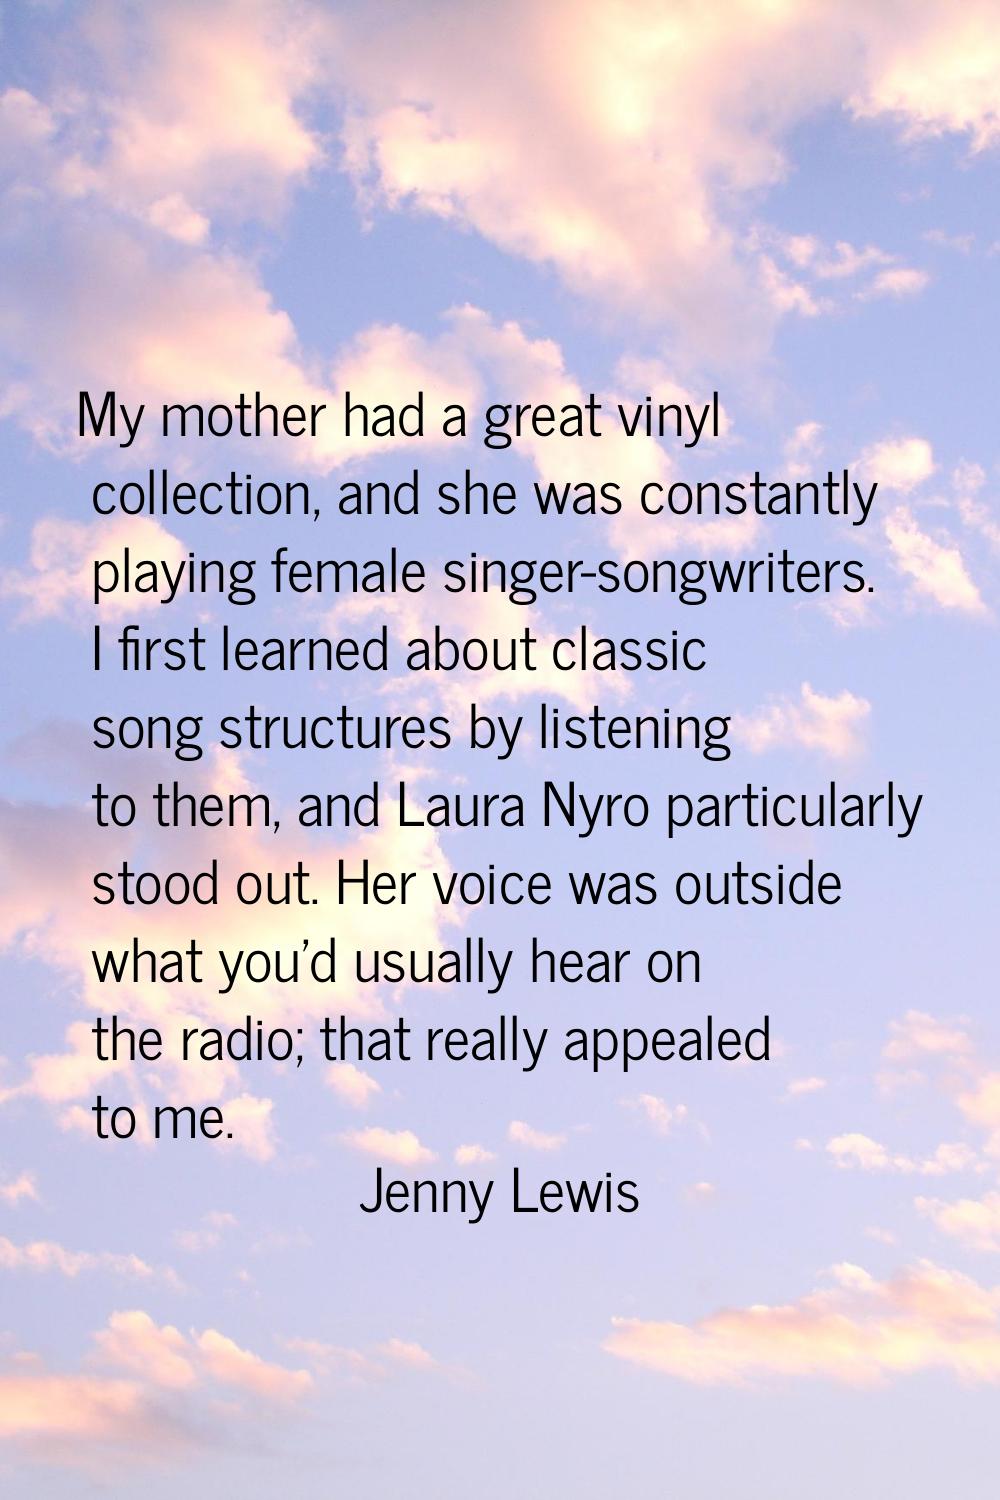 My mother had a great vinyl collection, and she was constantly playing female singer-songwriters. I